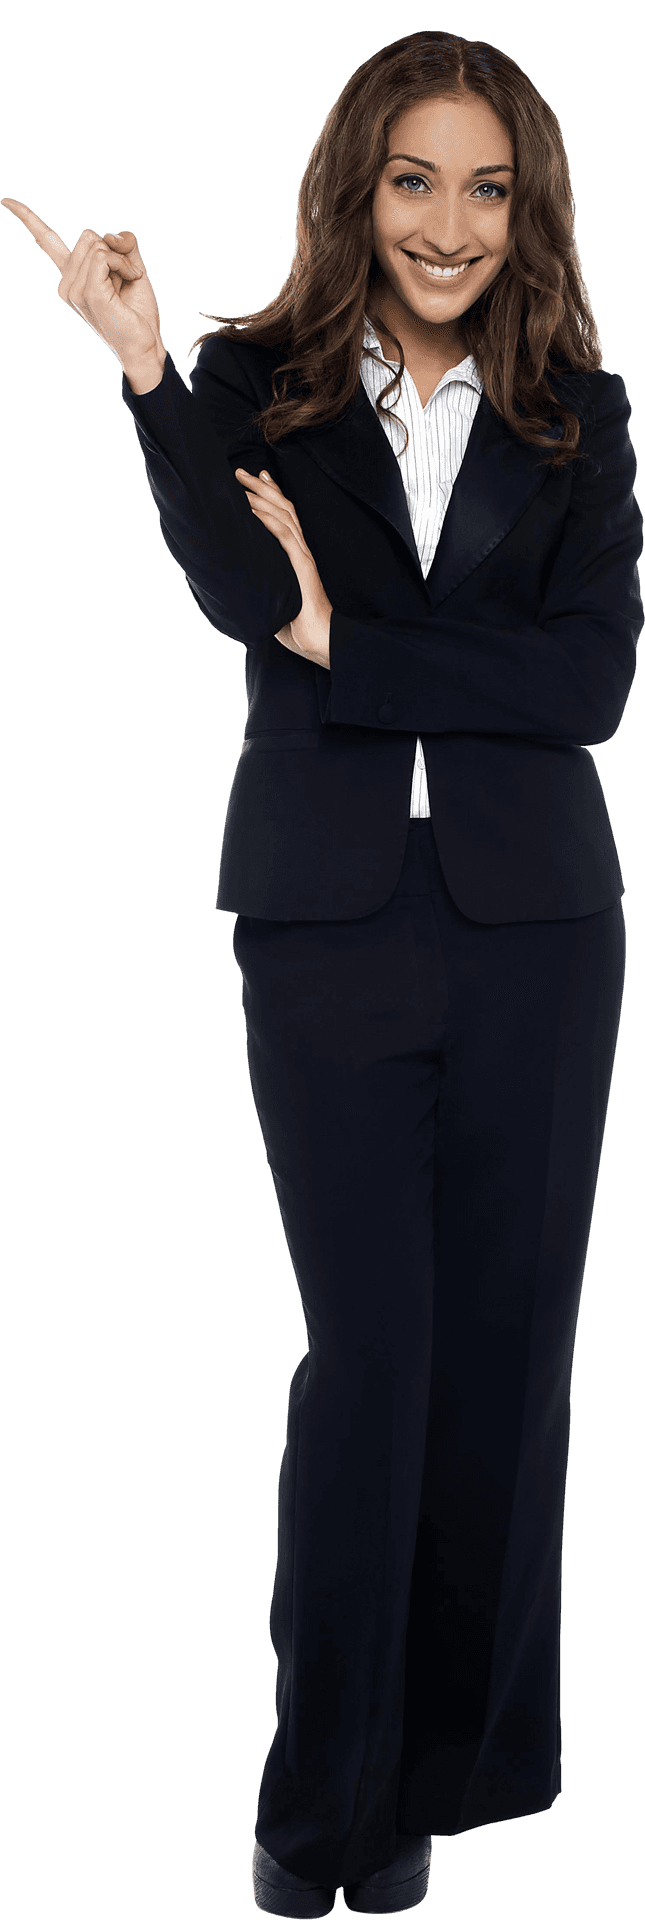 Confident Businesswoman Pointing Upward PNG